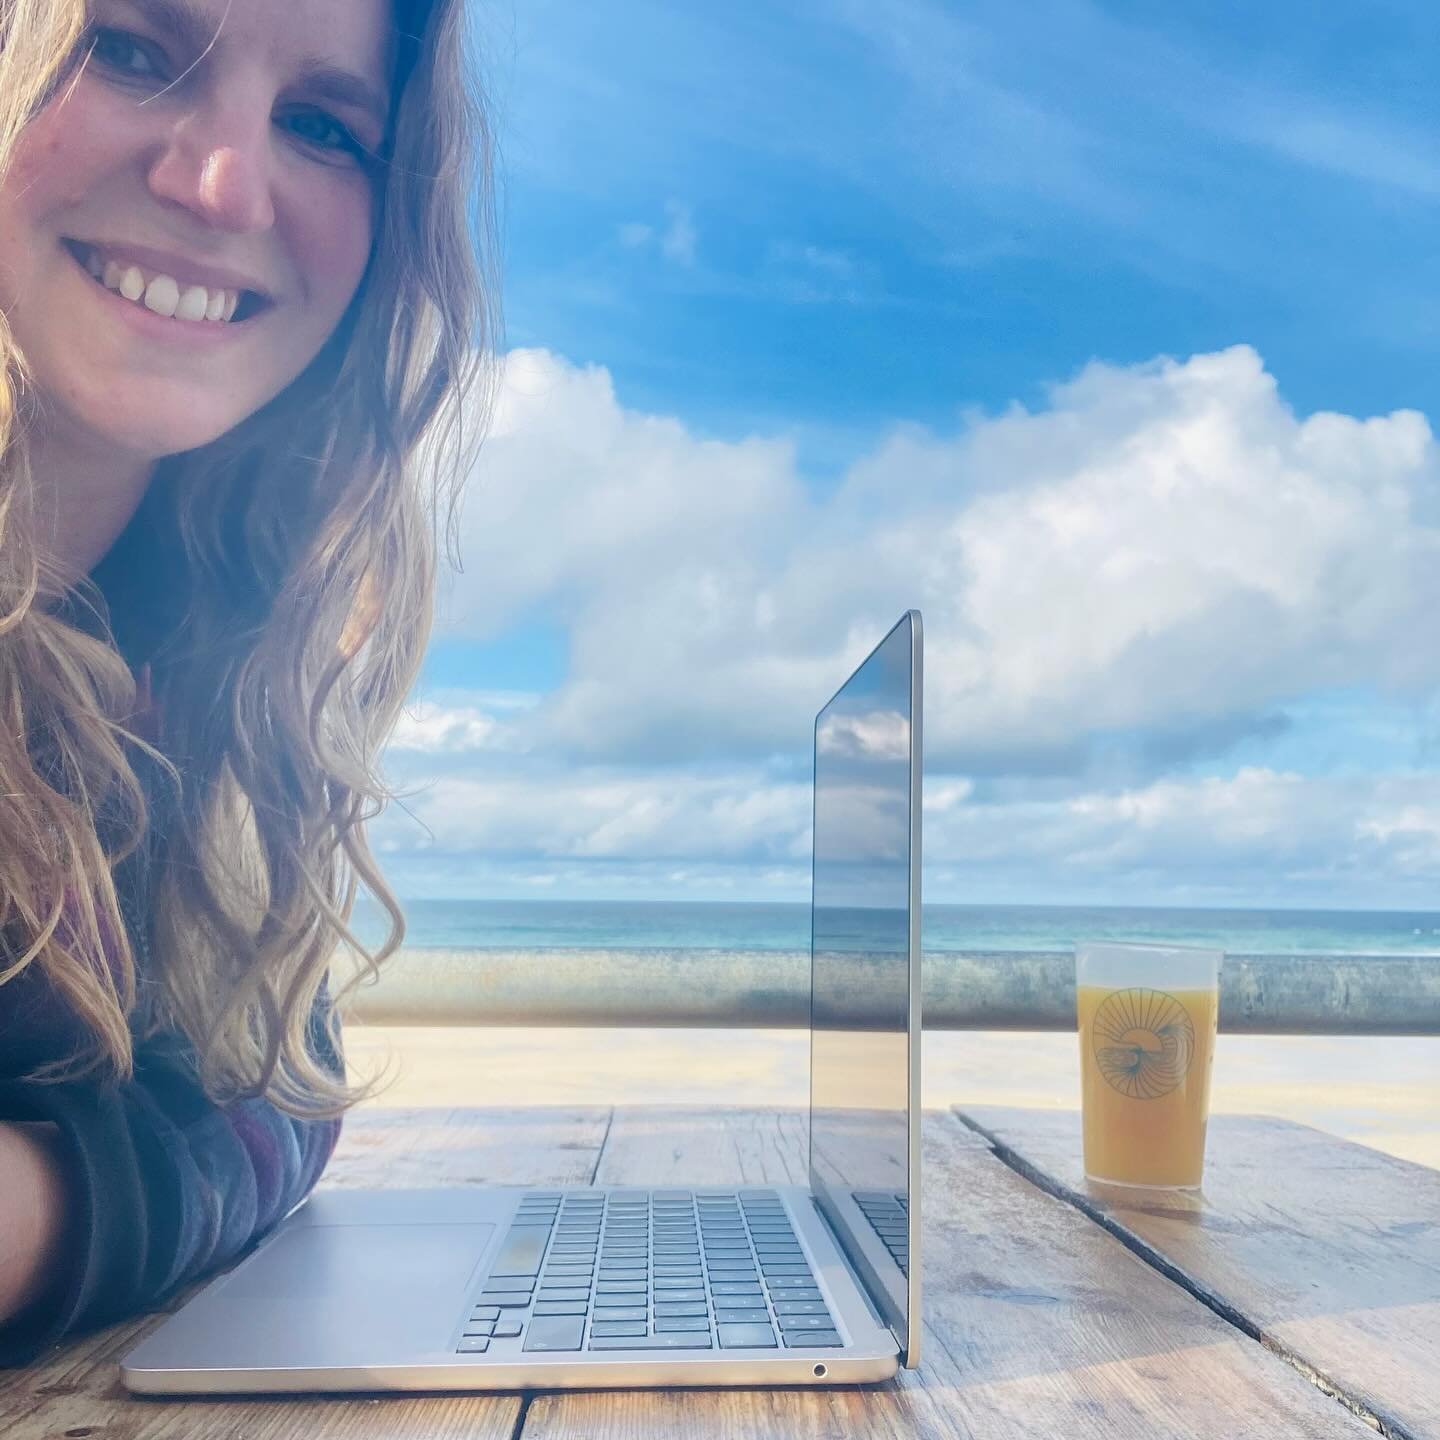 A savour the moment (/navel gazing &hellip;) post✨ It is WILD that I get to be here and call this work. I&rsquo;m in Cornwall, with six whole writing days ahead of me, working on the 5th Shell House mystery ✍️🌊 Three years ago I was readying The She